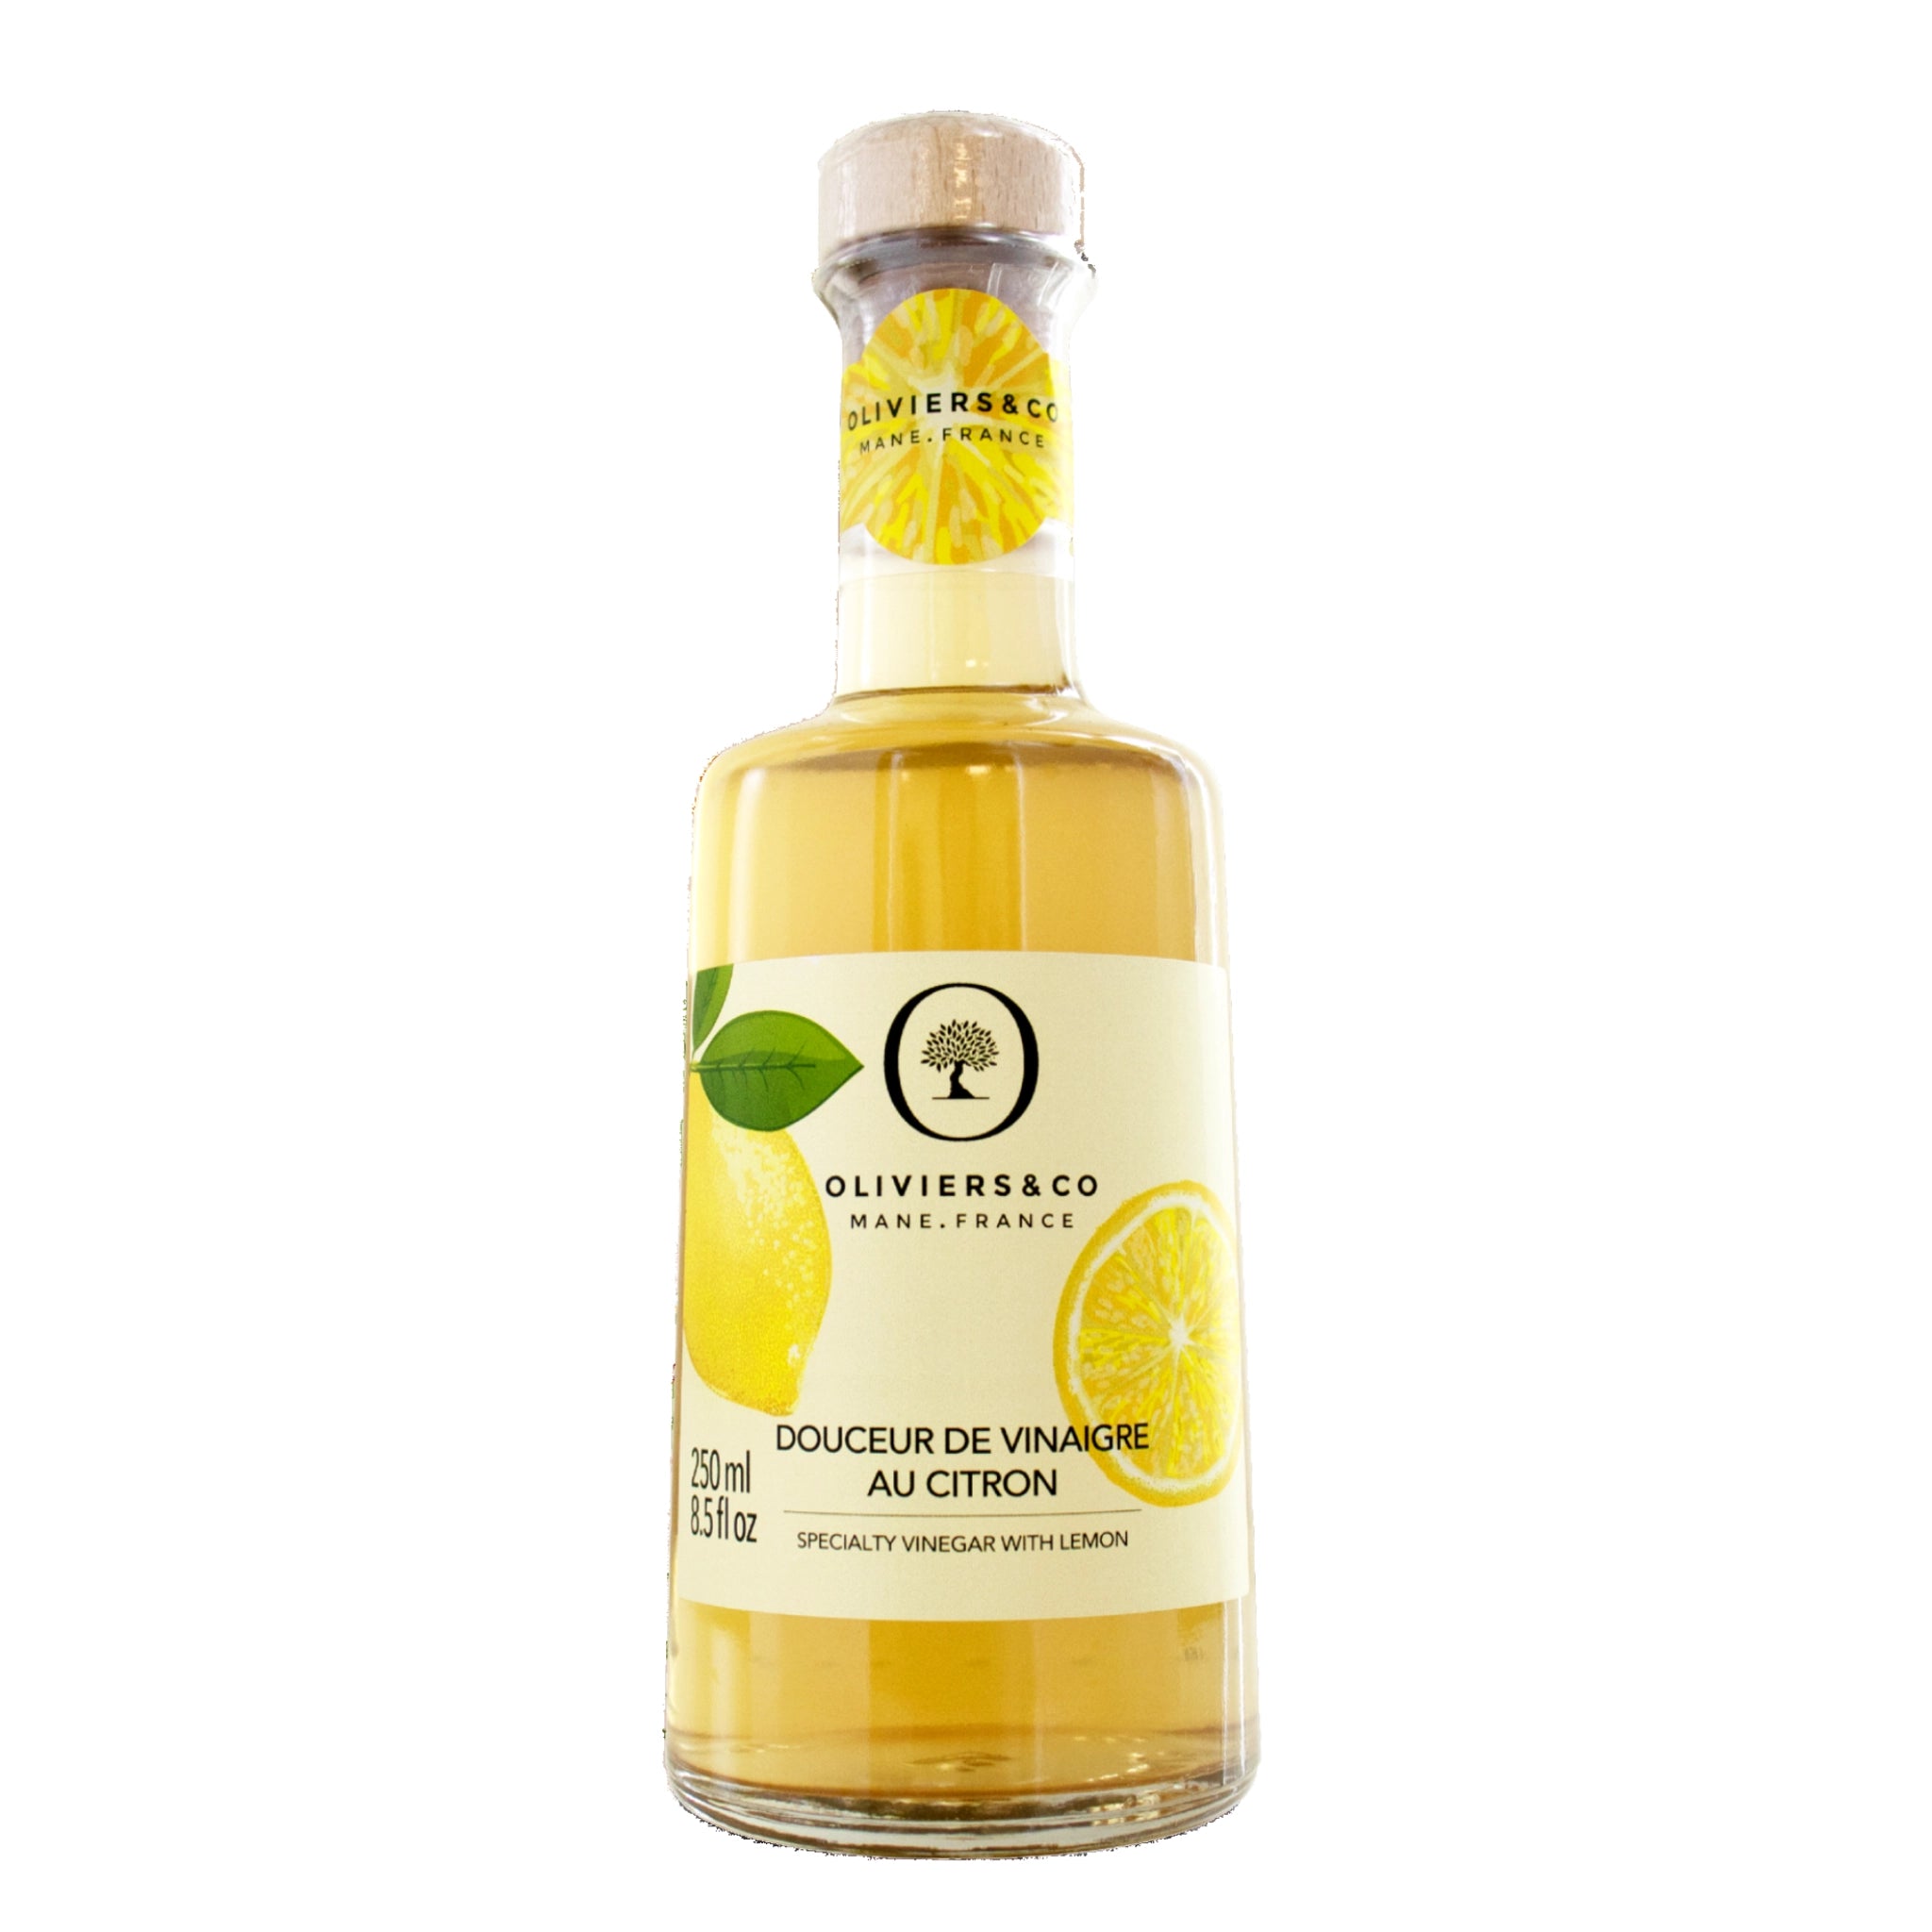 Limited edition gourmet citroneddike fra Oliviers & Co